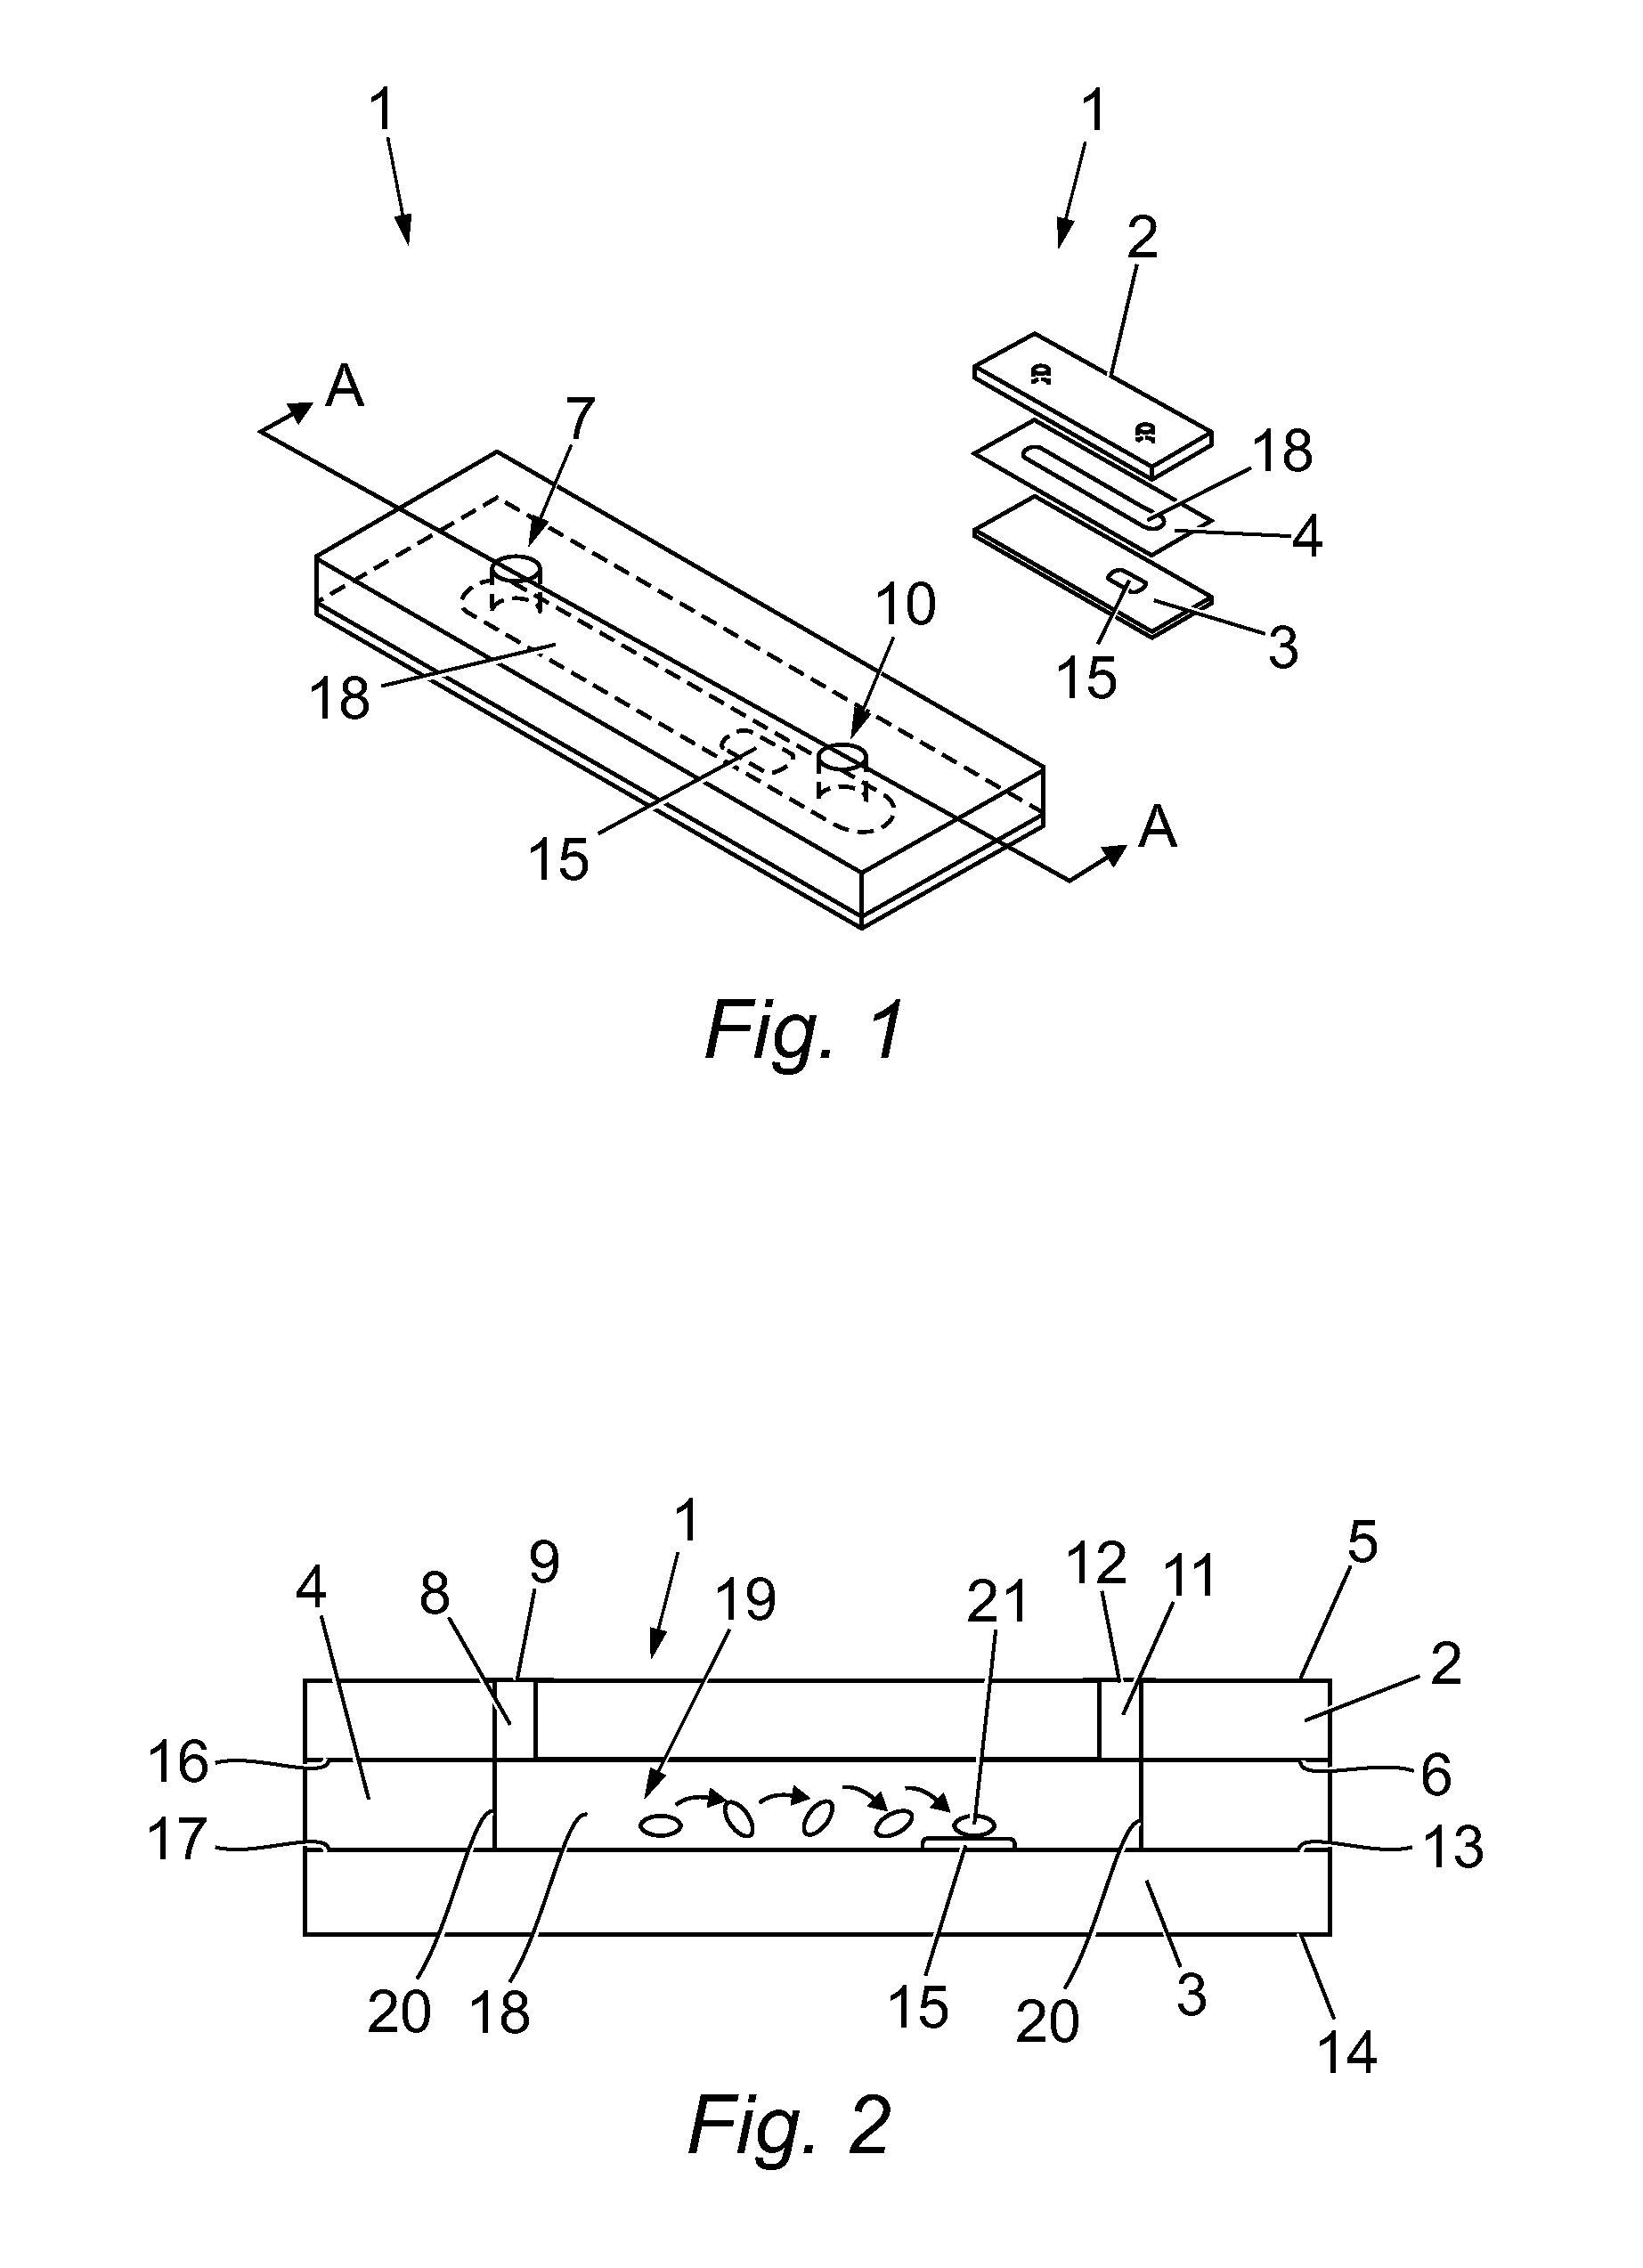 Microfluidic device for assessing object/test material interactions